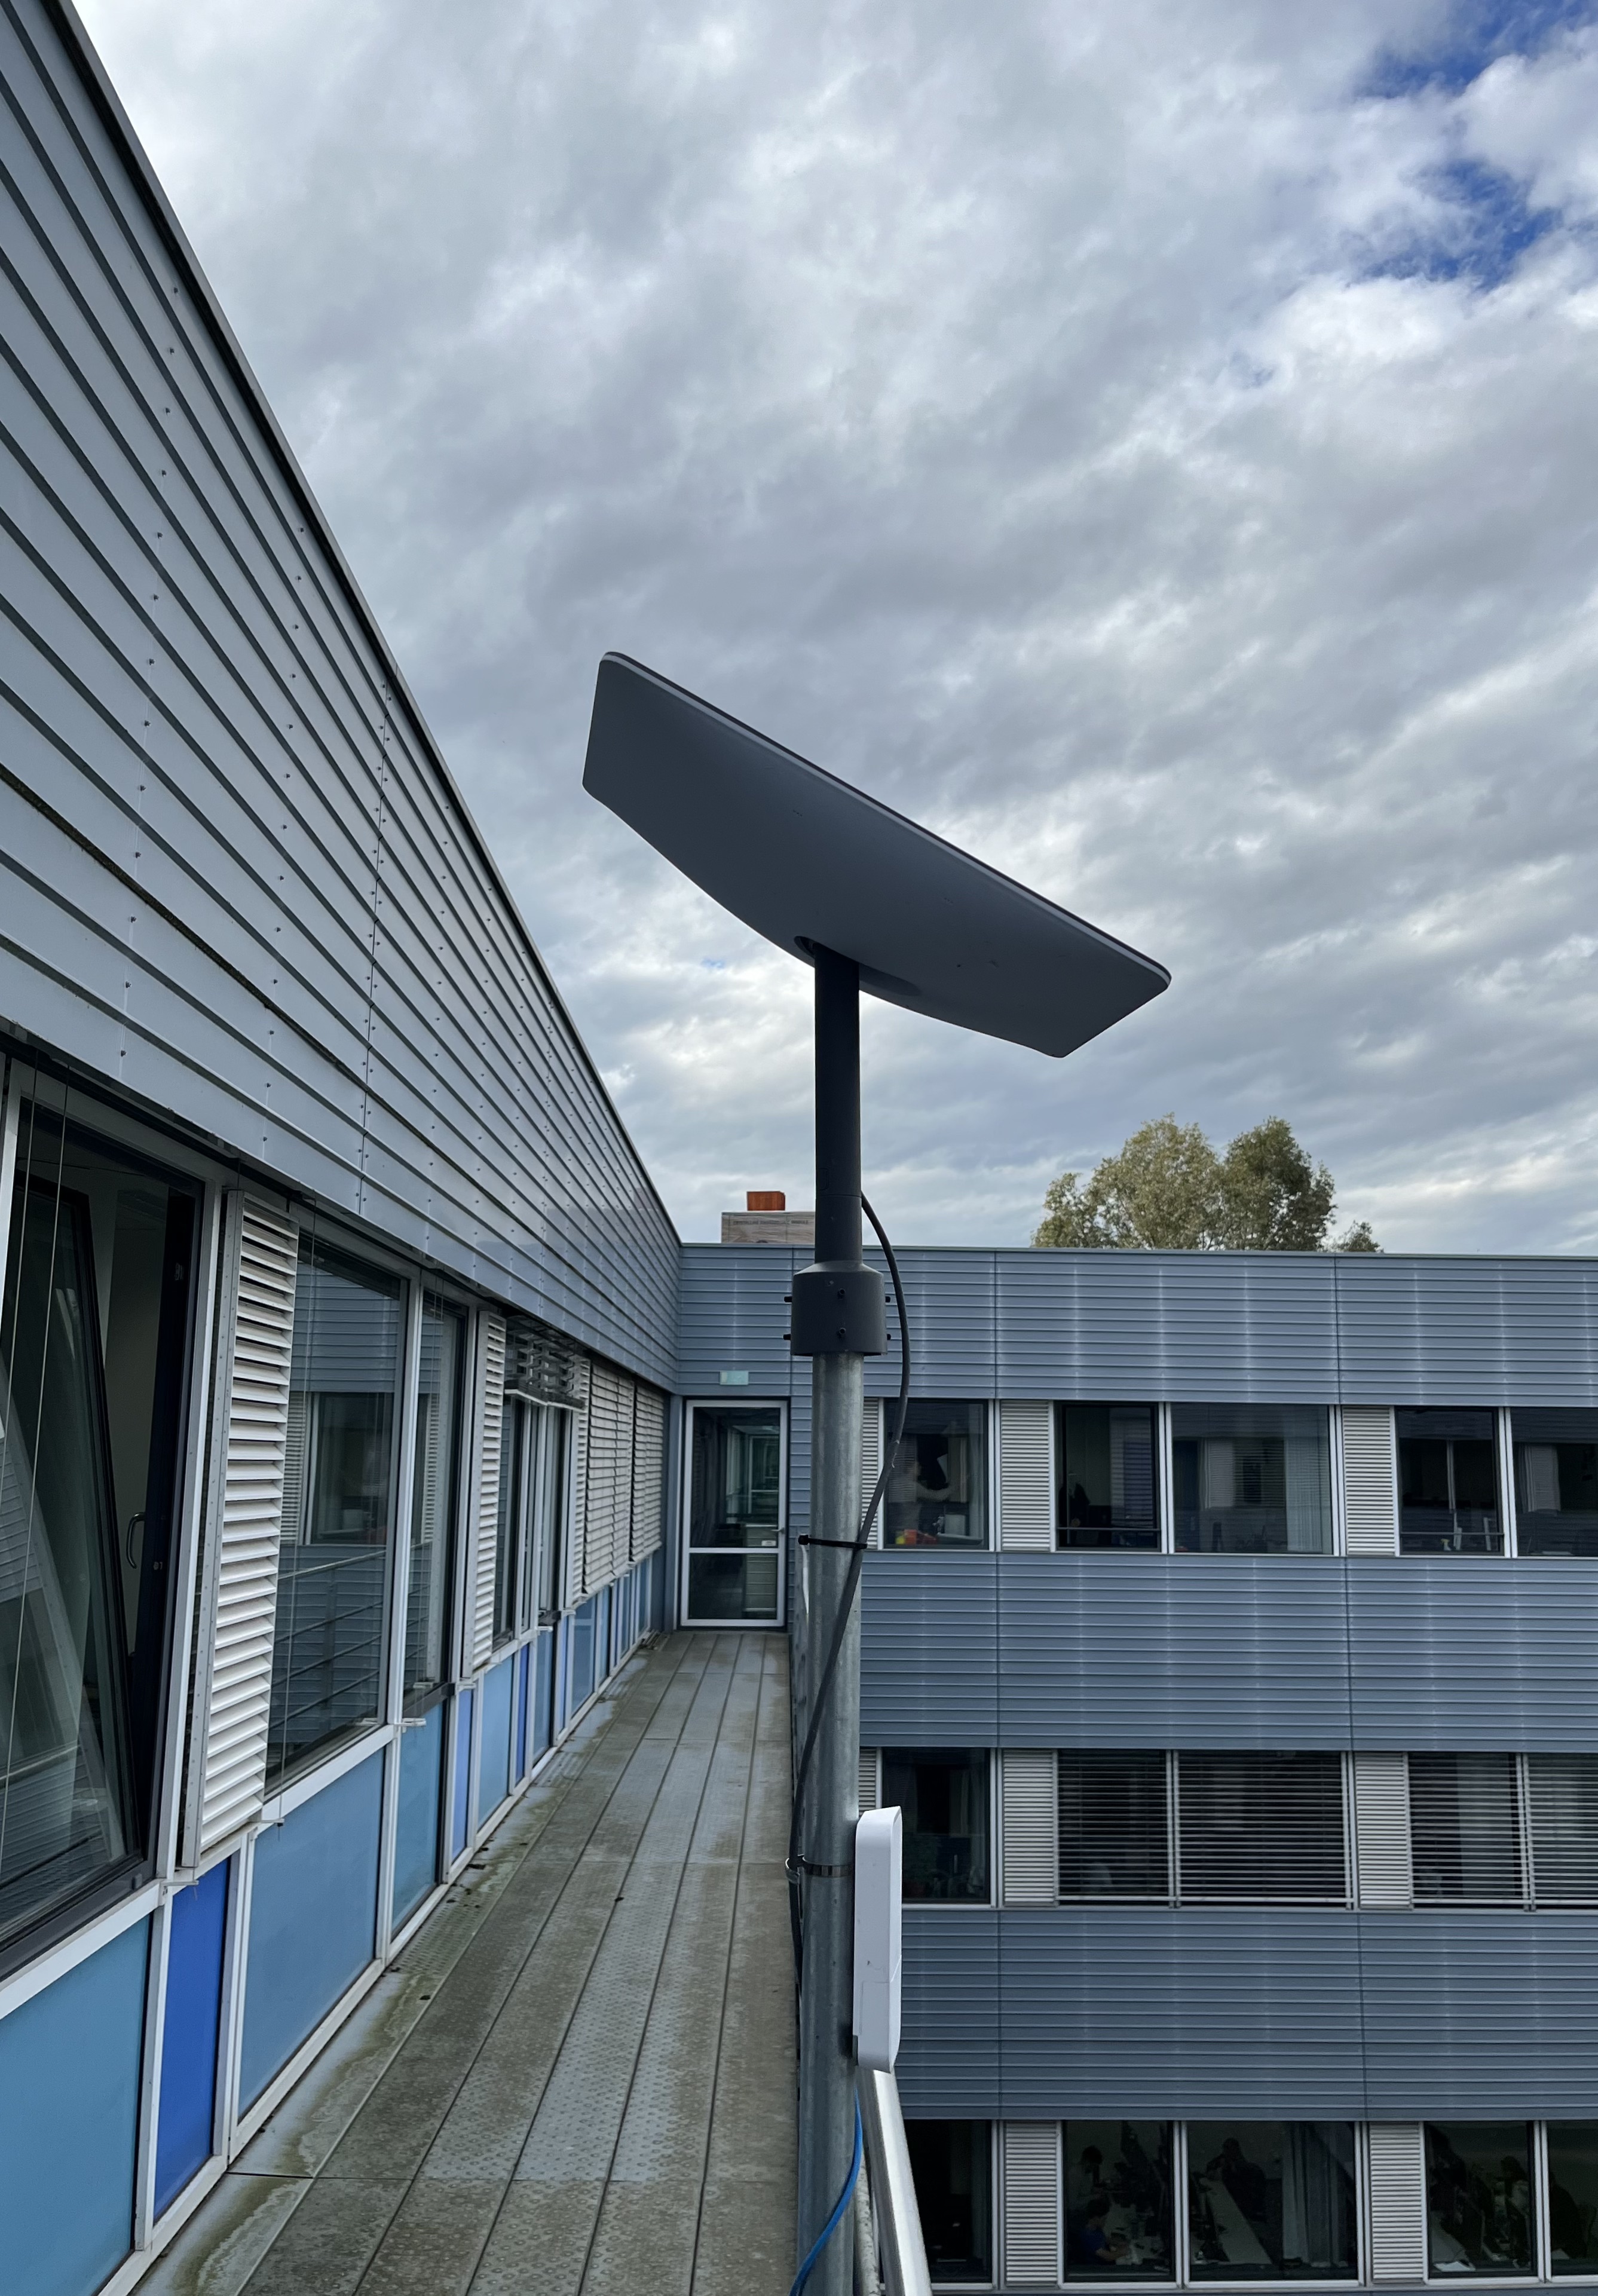 Our Starlink dish, located in Garching, München, DE